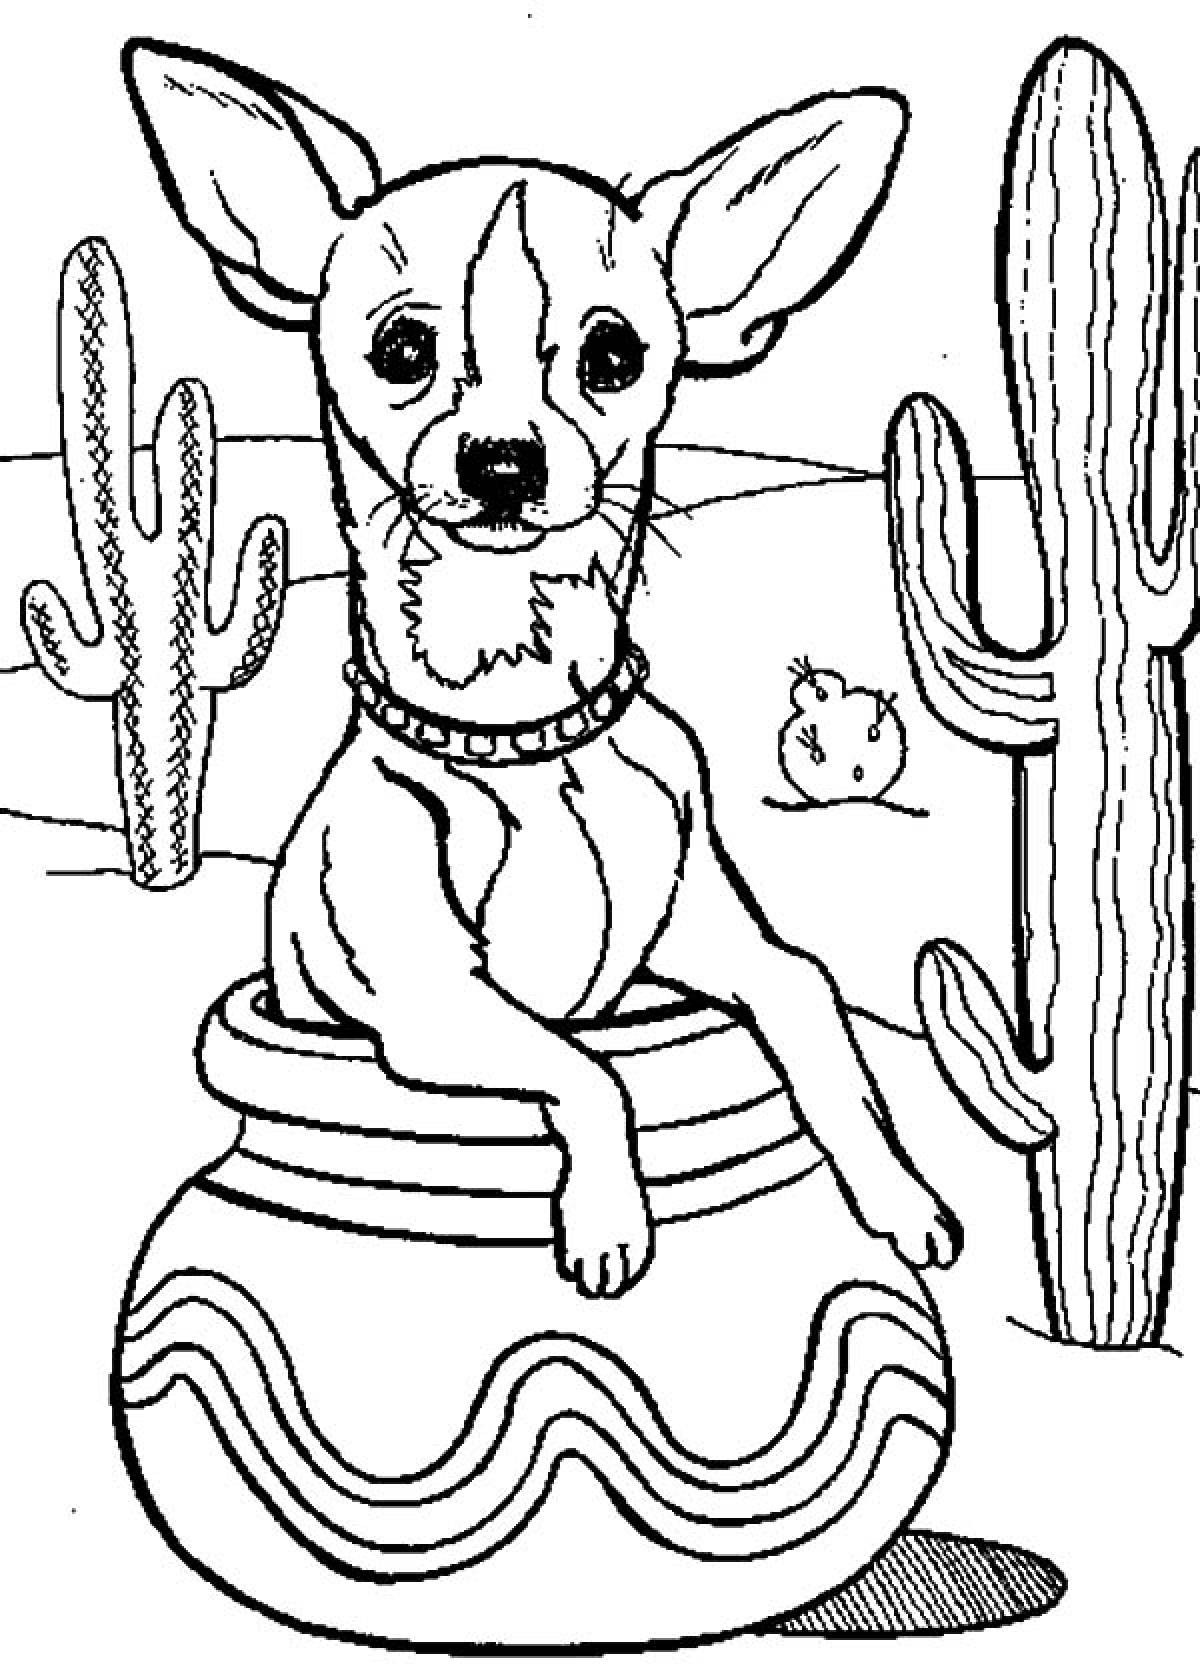 Chihuahua with cacti